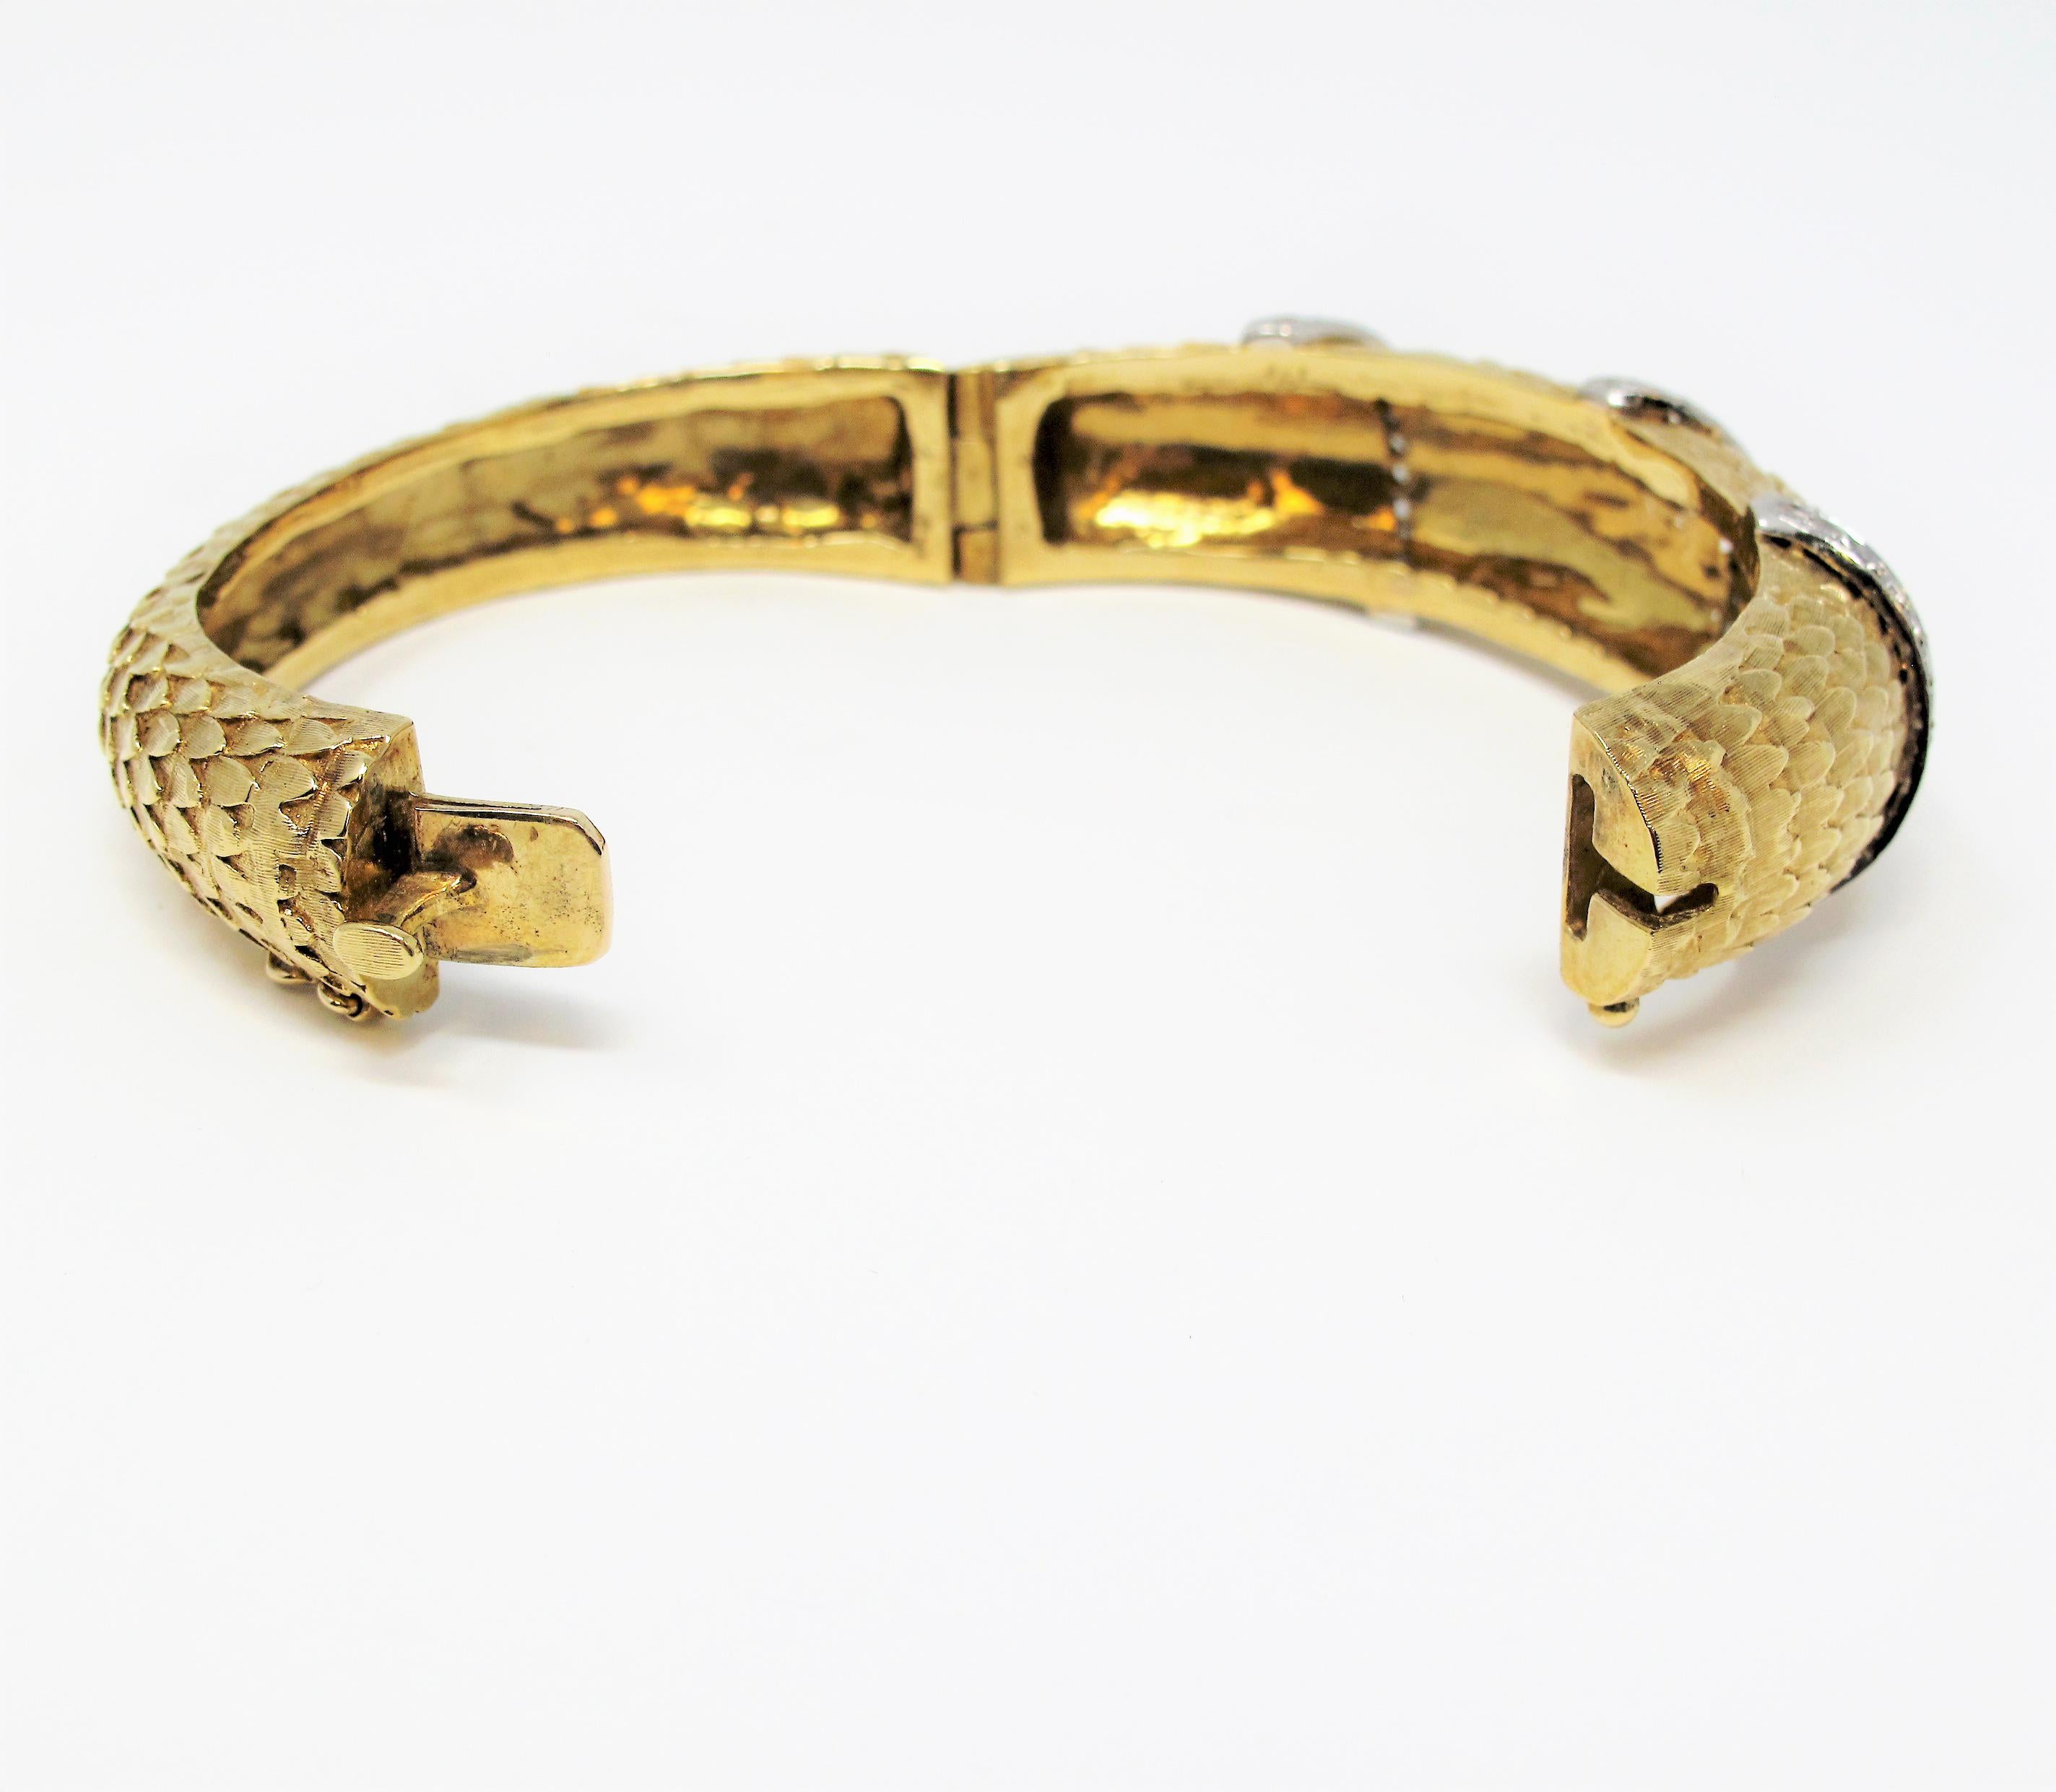 Contemporary Scaled Hinged Cuff Bracelet in 18 Karat Yellow Gold with Pave Diamond Wraps